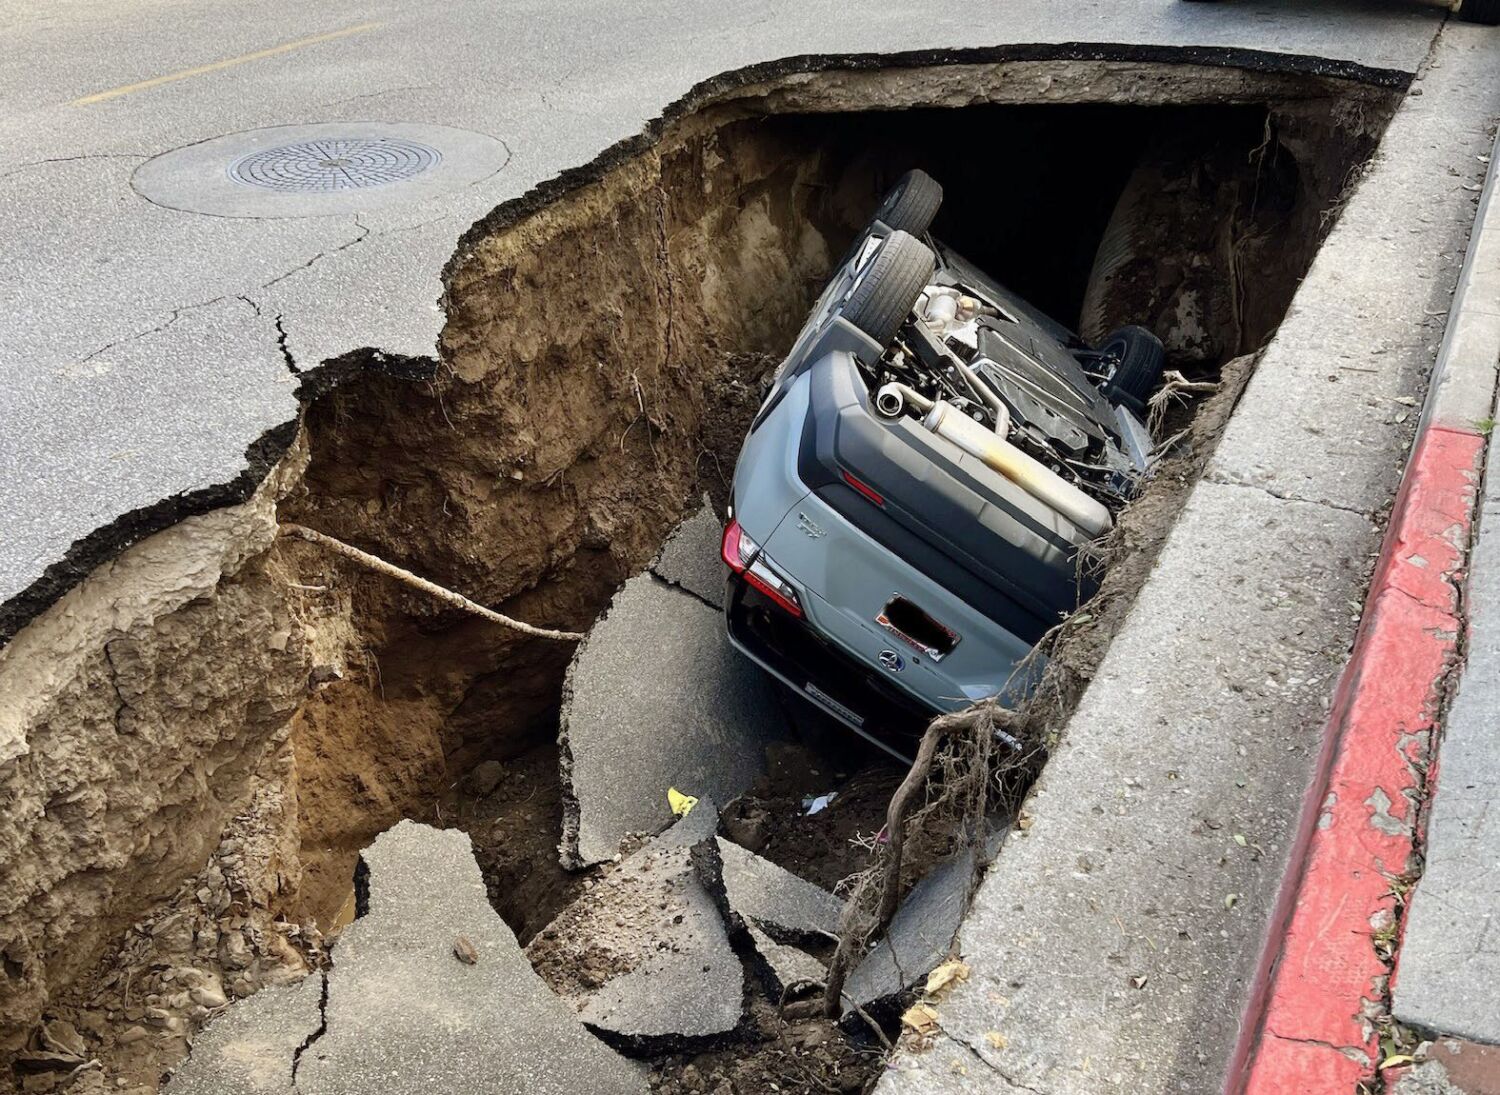 Sinkholes crop up across Southern California after winter storms battered the region